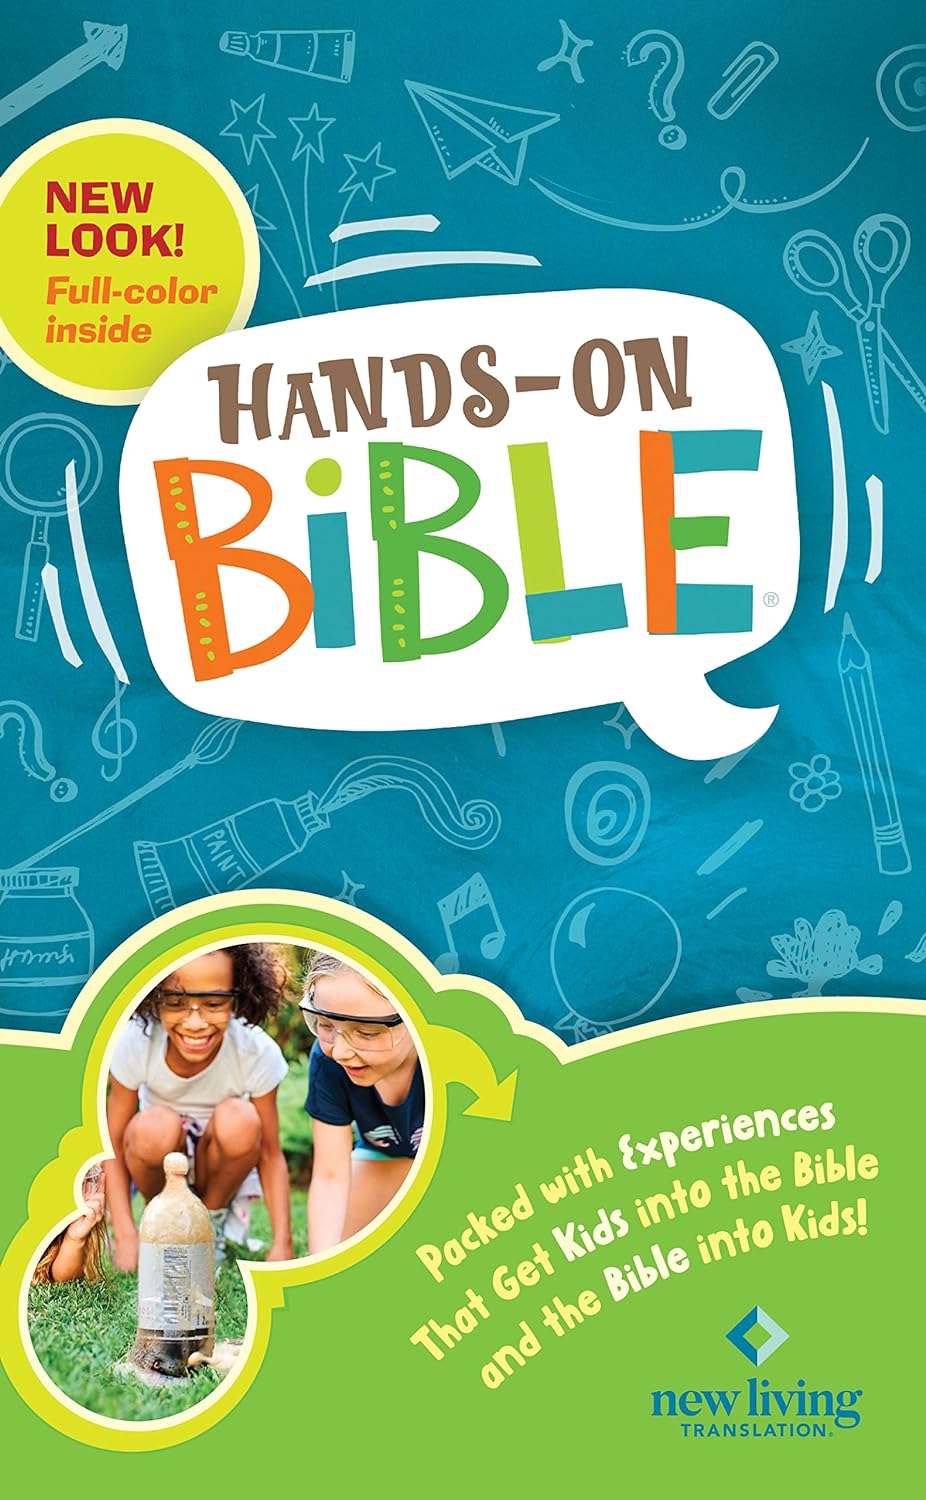 Hands-On Bible in the NLT Bible translation for kids